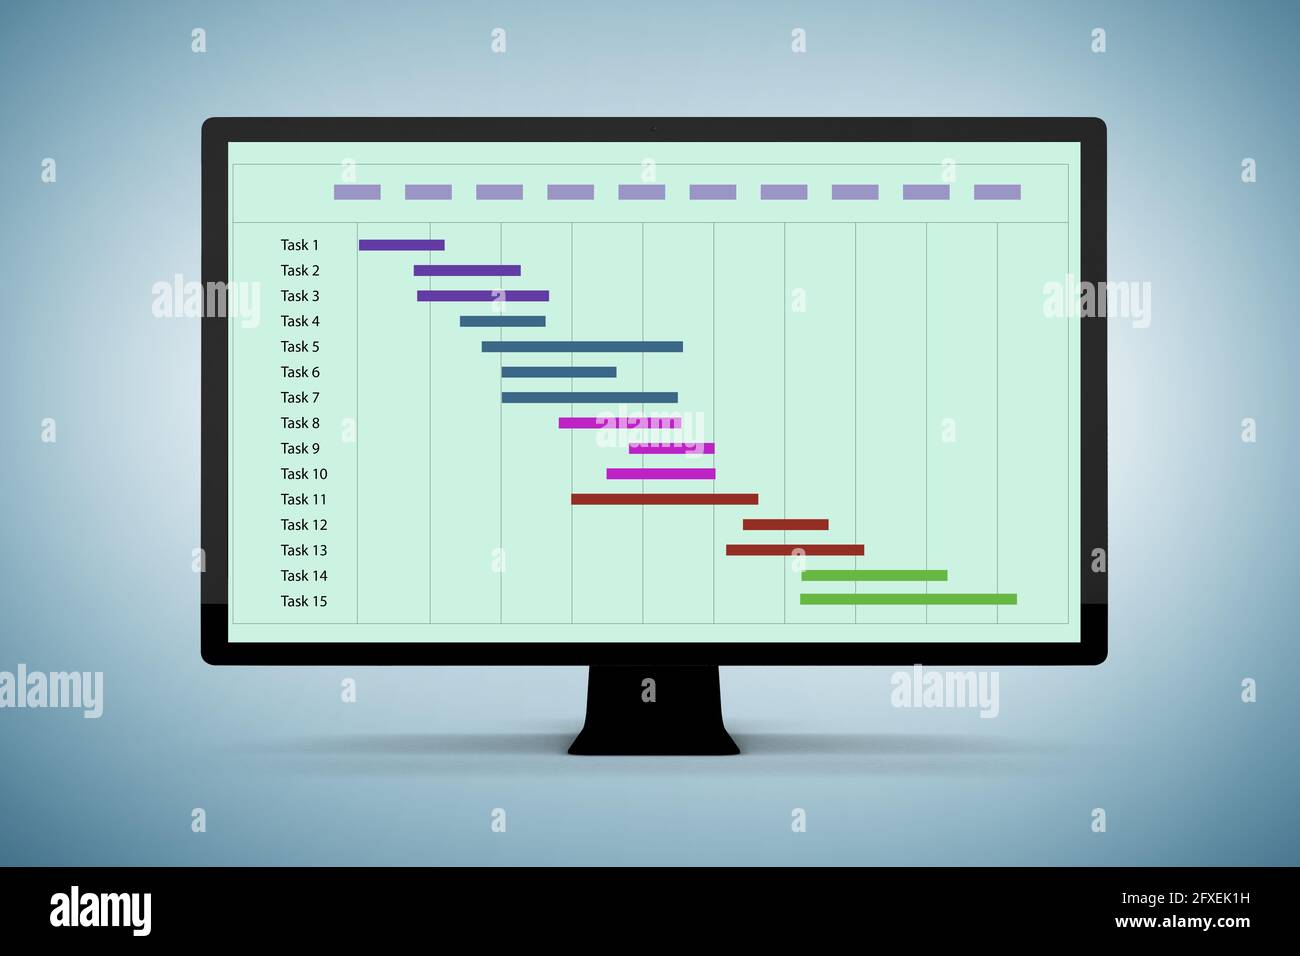 Illustration of gantt chart in the project management concept Stock Photo